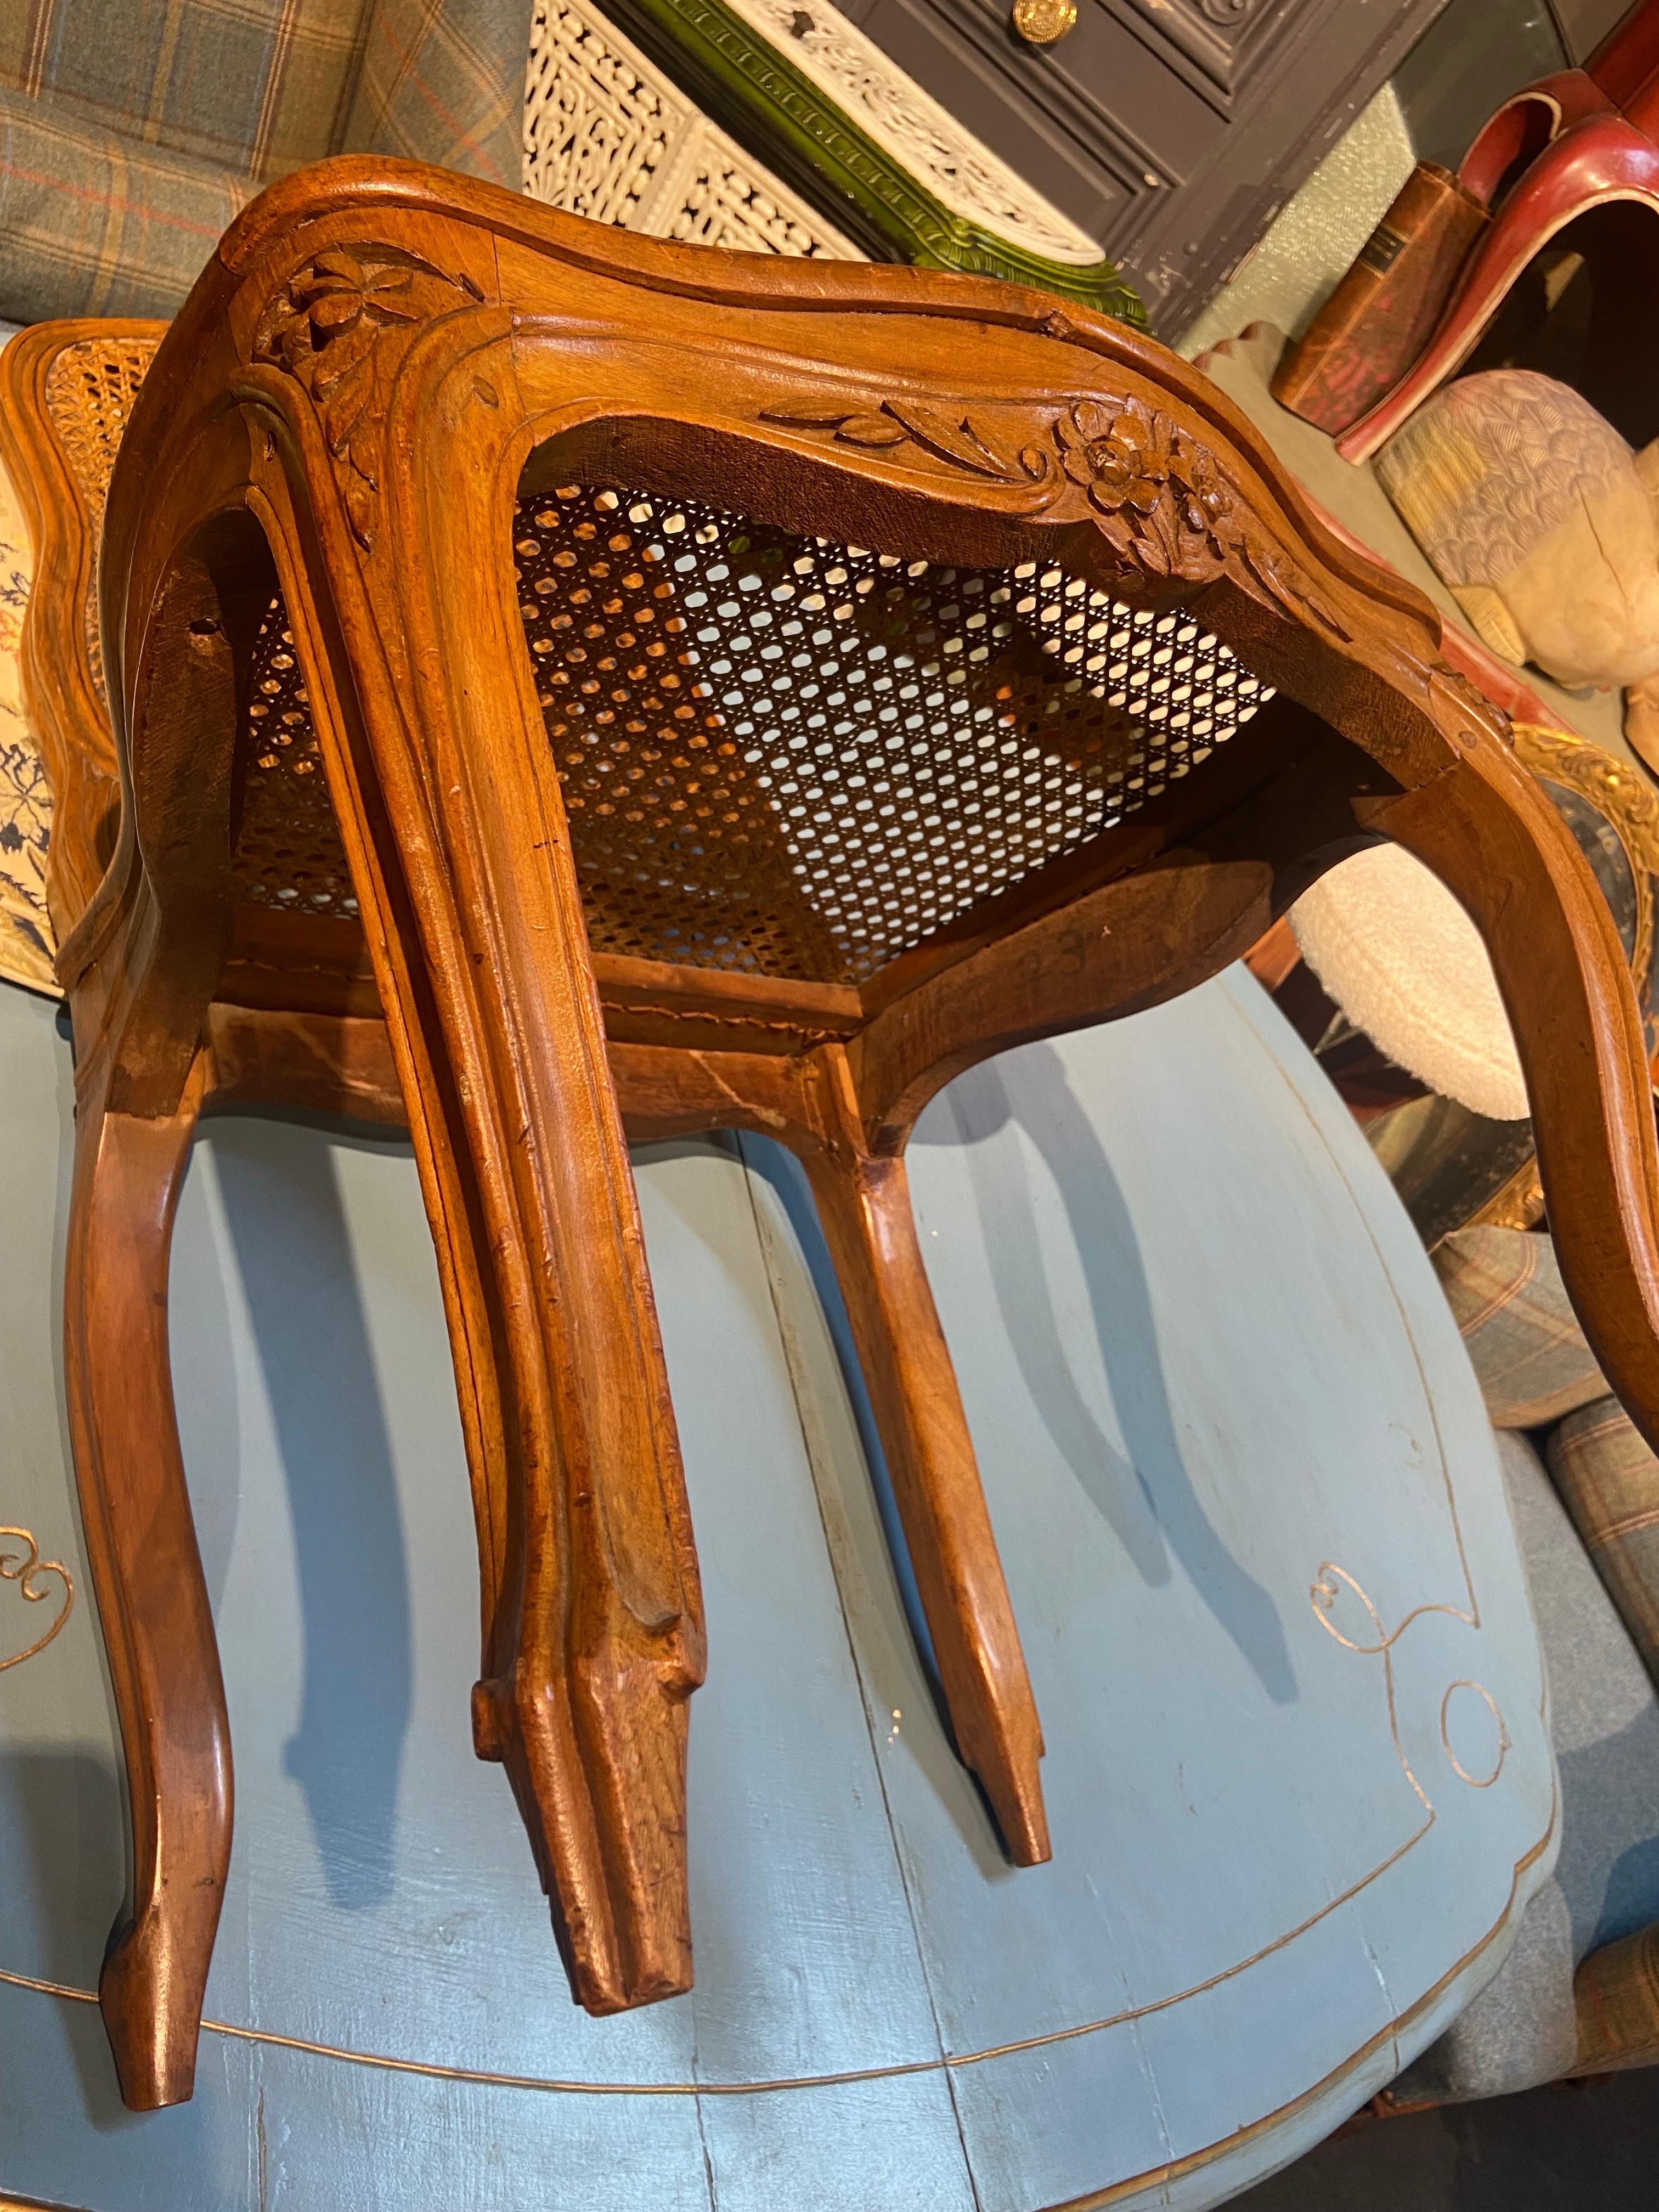 19th Century French Cane Chairs in Hand Carved Walnut Frame in Louis XV Style For Sale 5